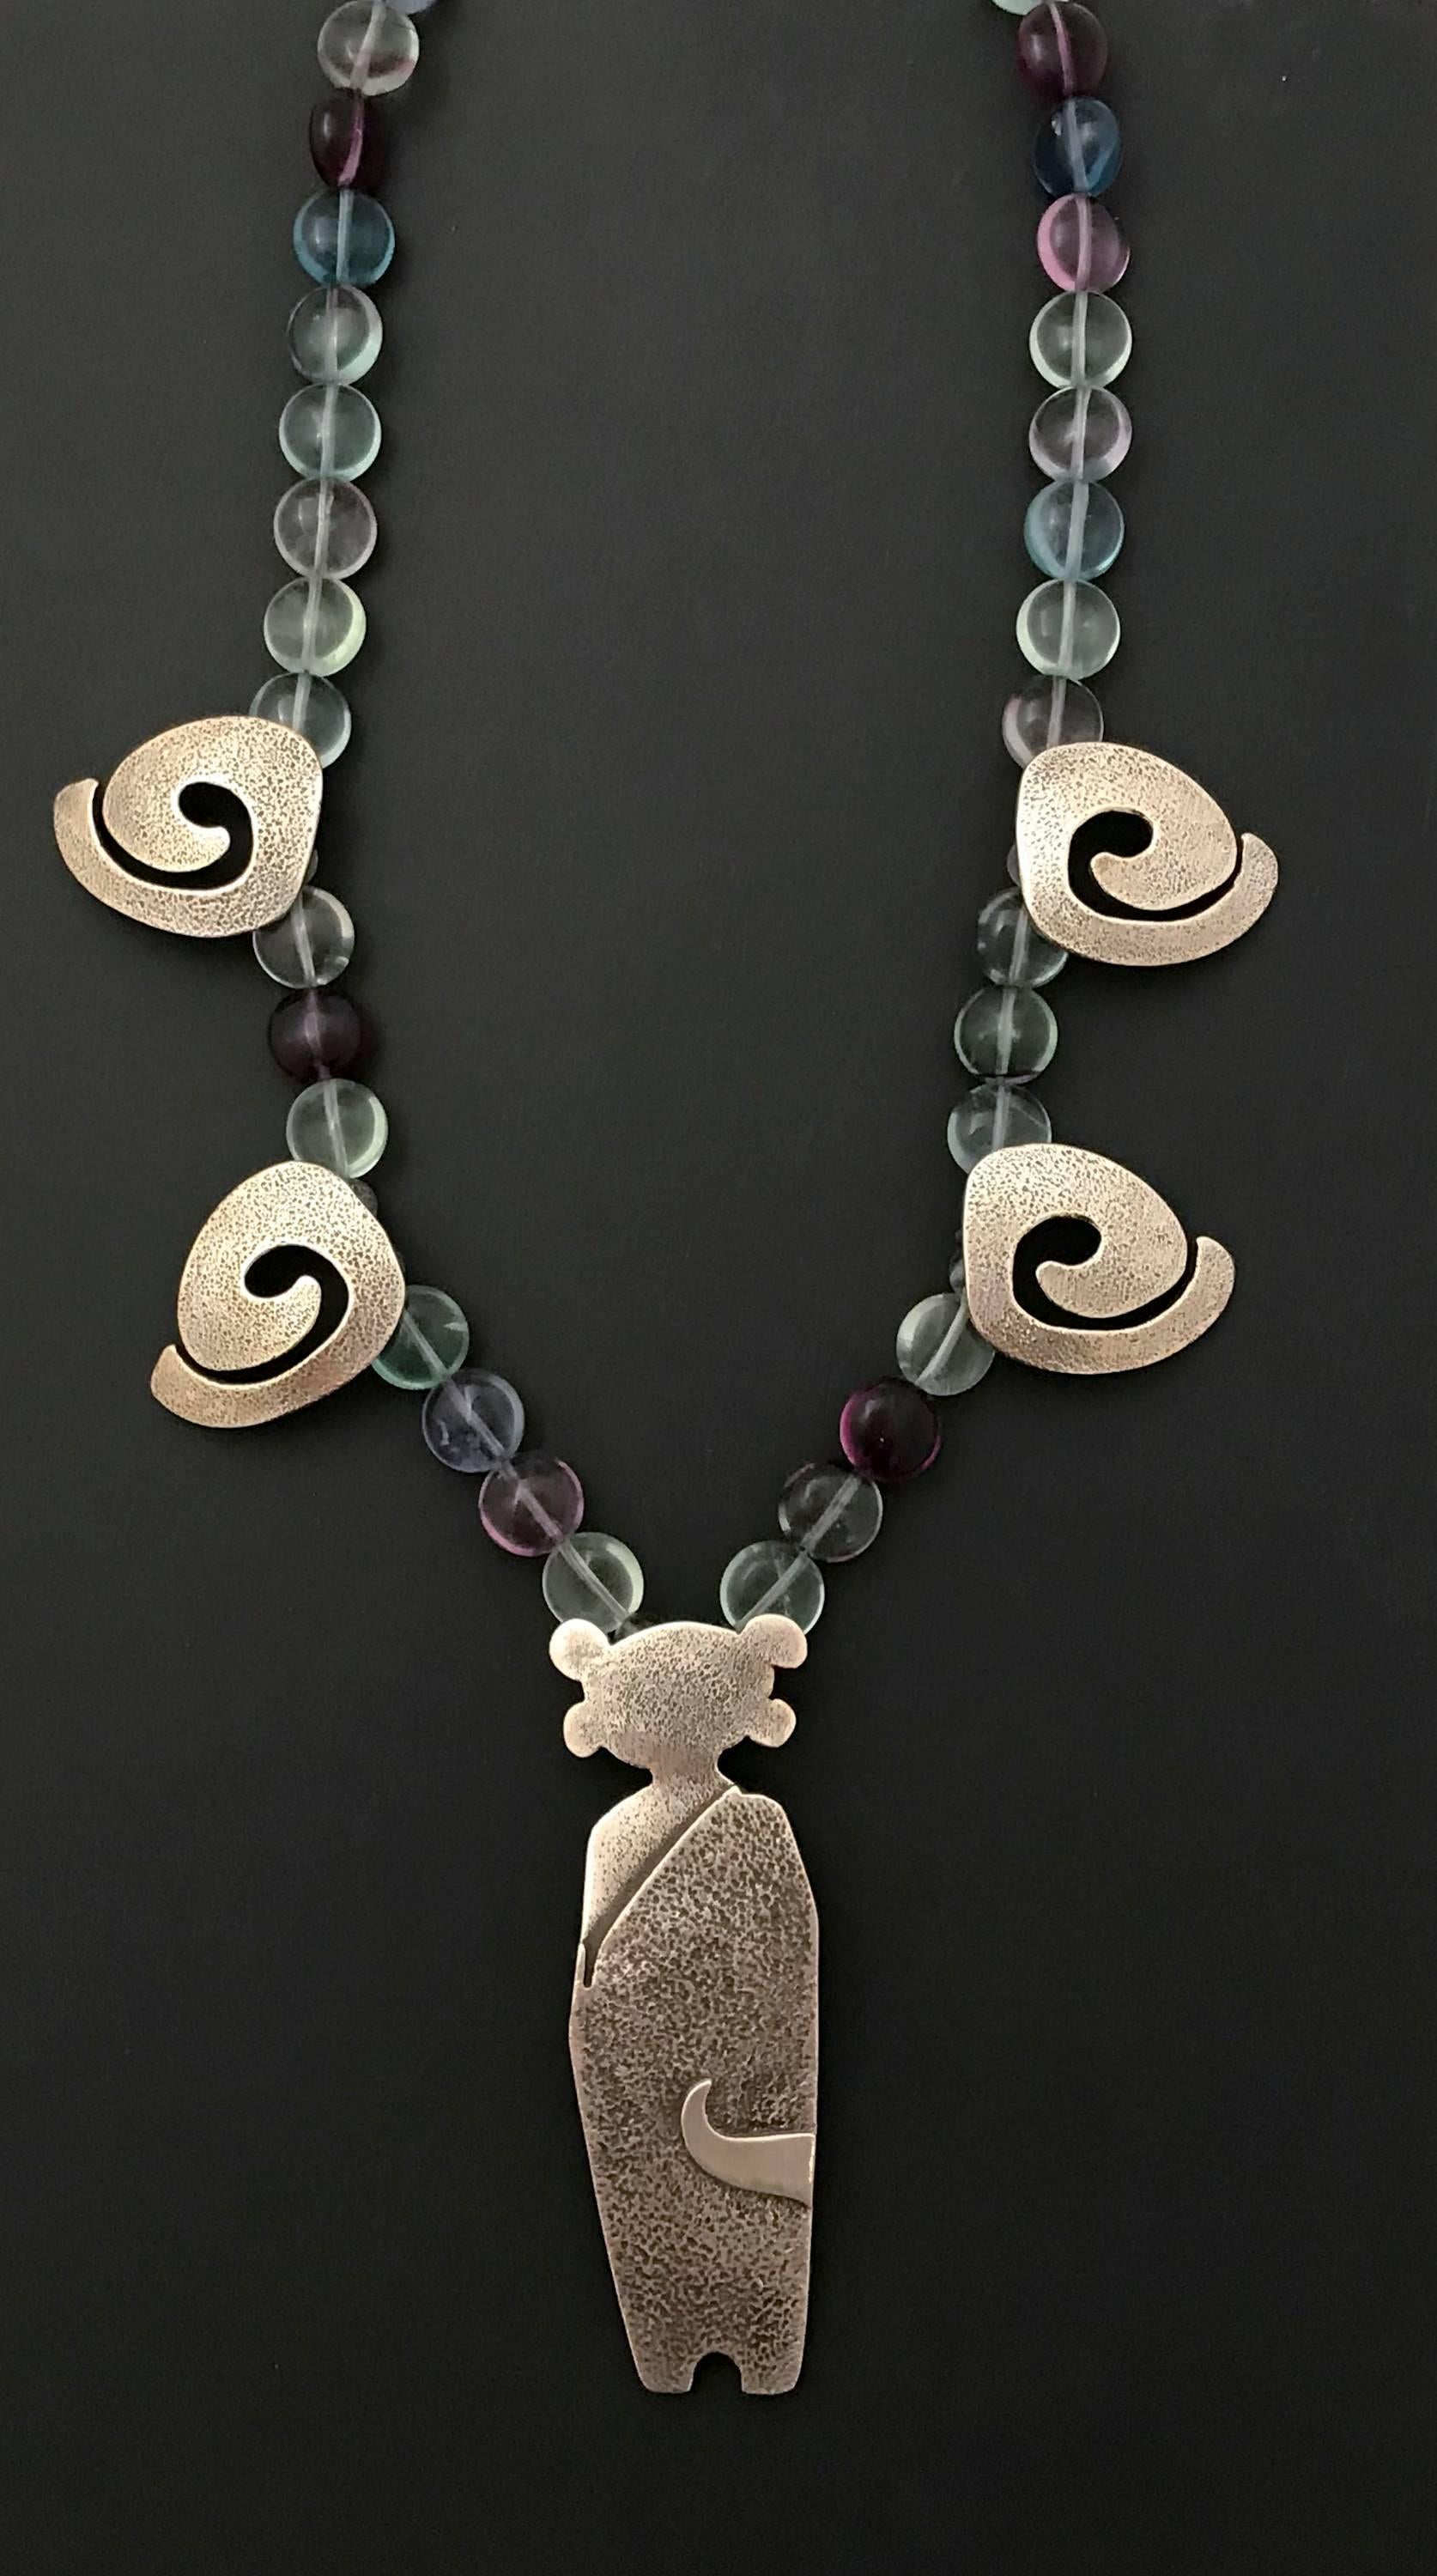 Standing Guard necklace, sterling silver, fluorite beads - Mixed Media Art by Melanie Yazzie